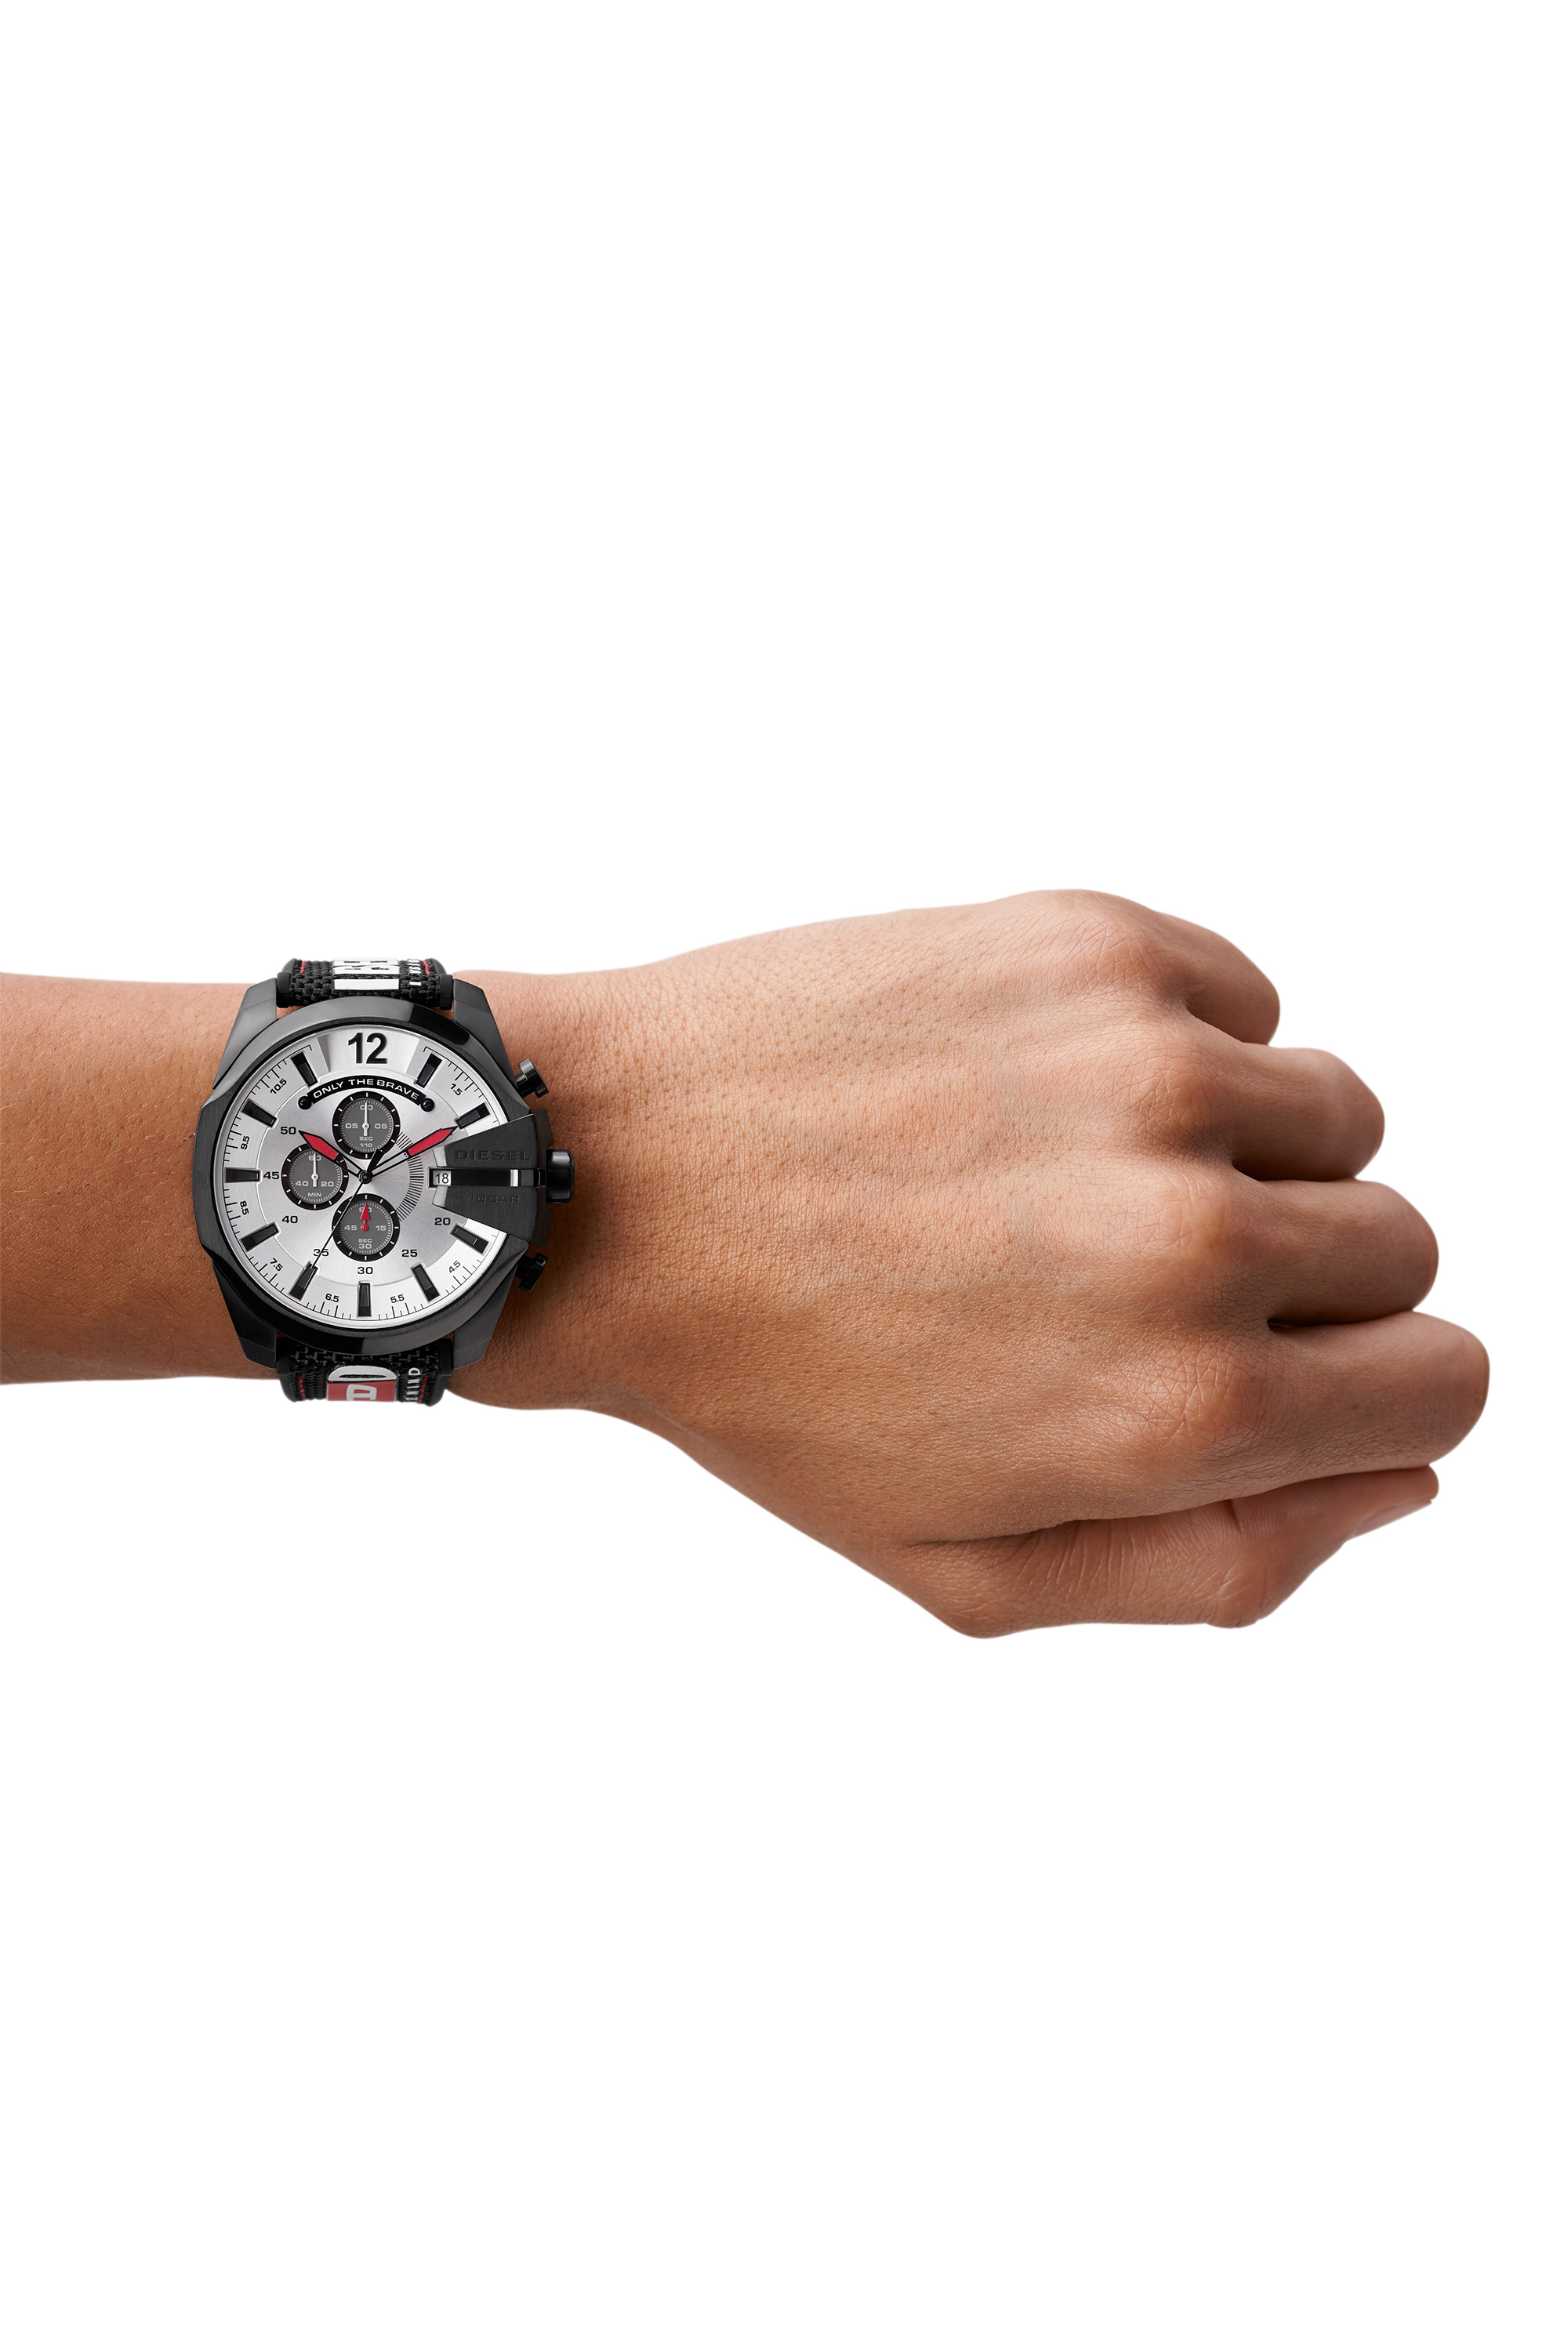 Men's Large Round Dial Watches | Diesel Mega Chief